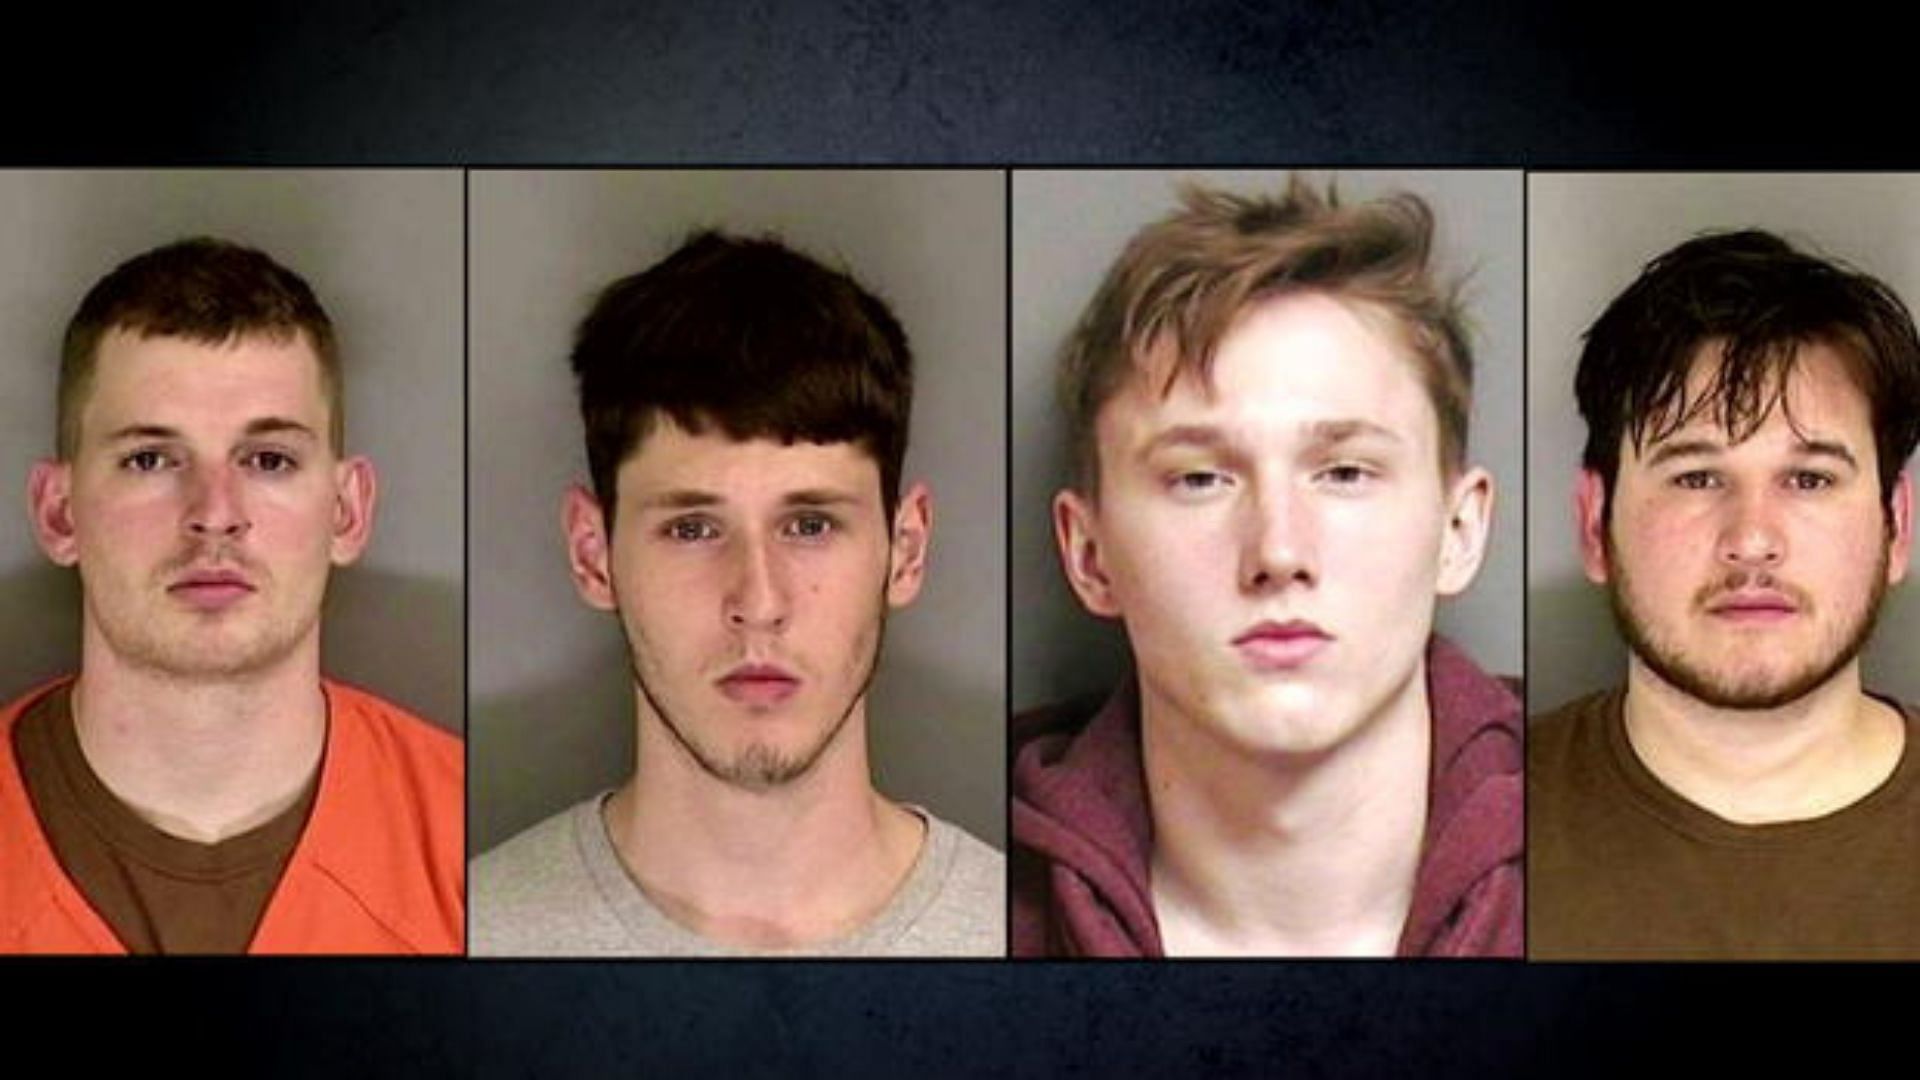 A still of the four main suspects in Atre&#039;s murder case, including Stephen Nicolas Lindsay, Kurtis Charters, Kaleb Charters, and Joshua Camps (Image Via CBS News)